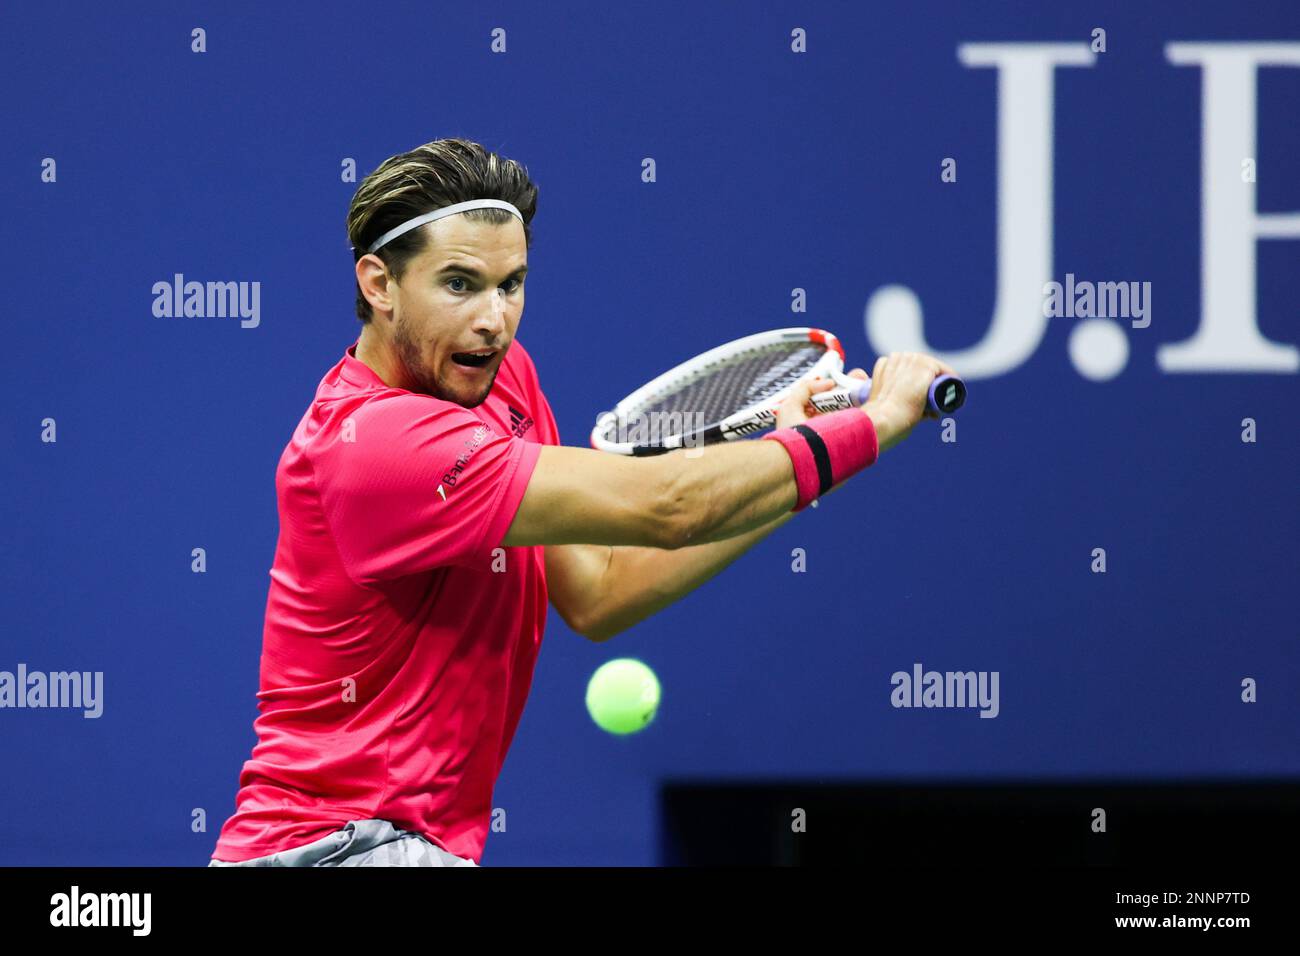 Dominic Thiem in action against Daniil Medvedev during a mens singles Semifinal match at the 2020 US Open, Friday, Sept